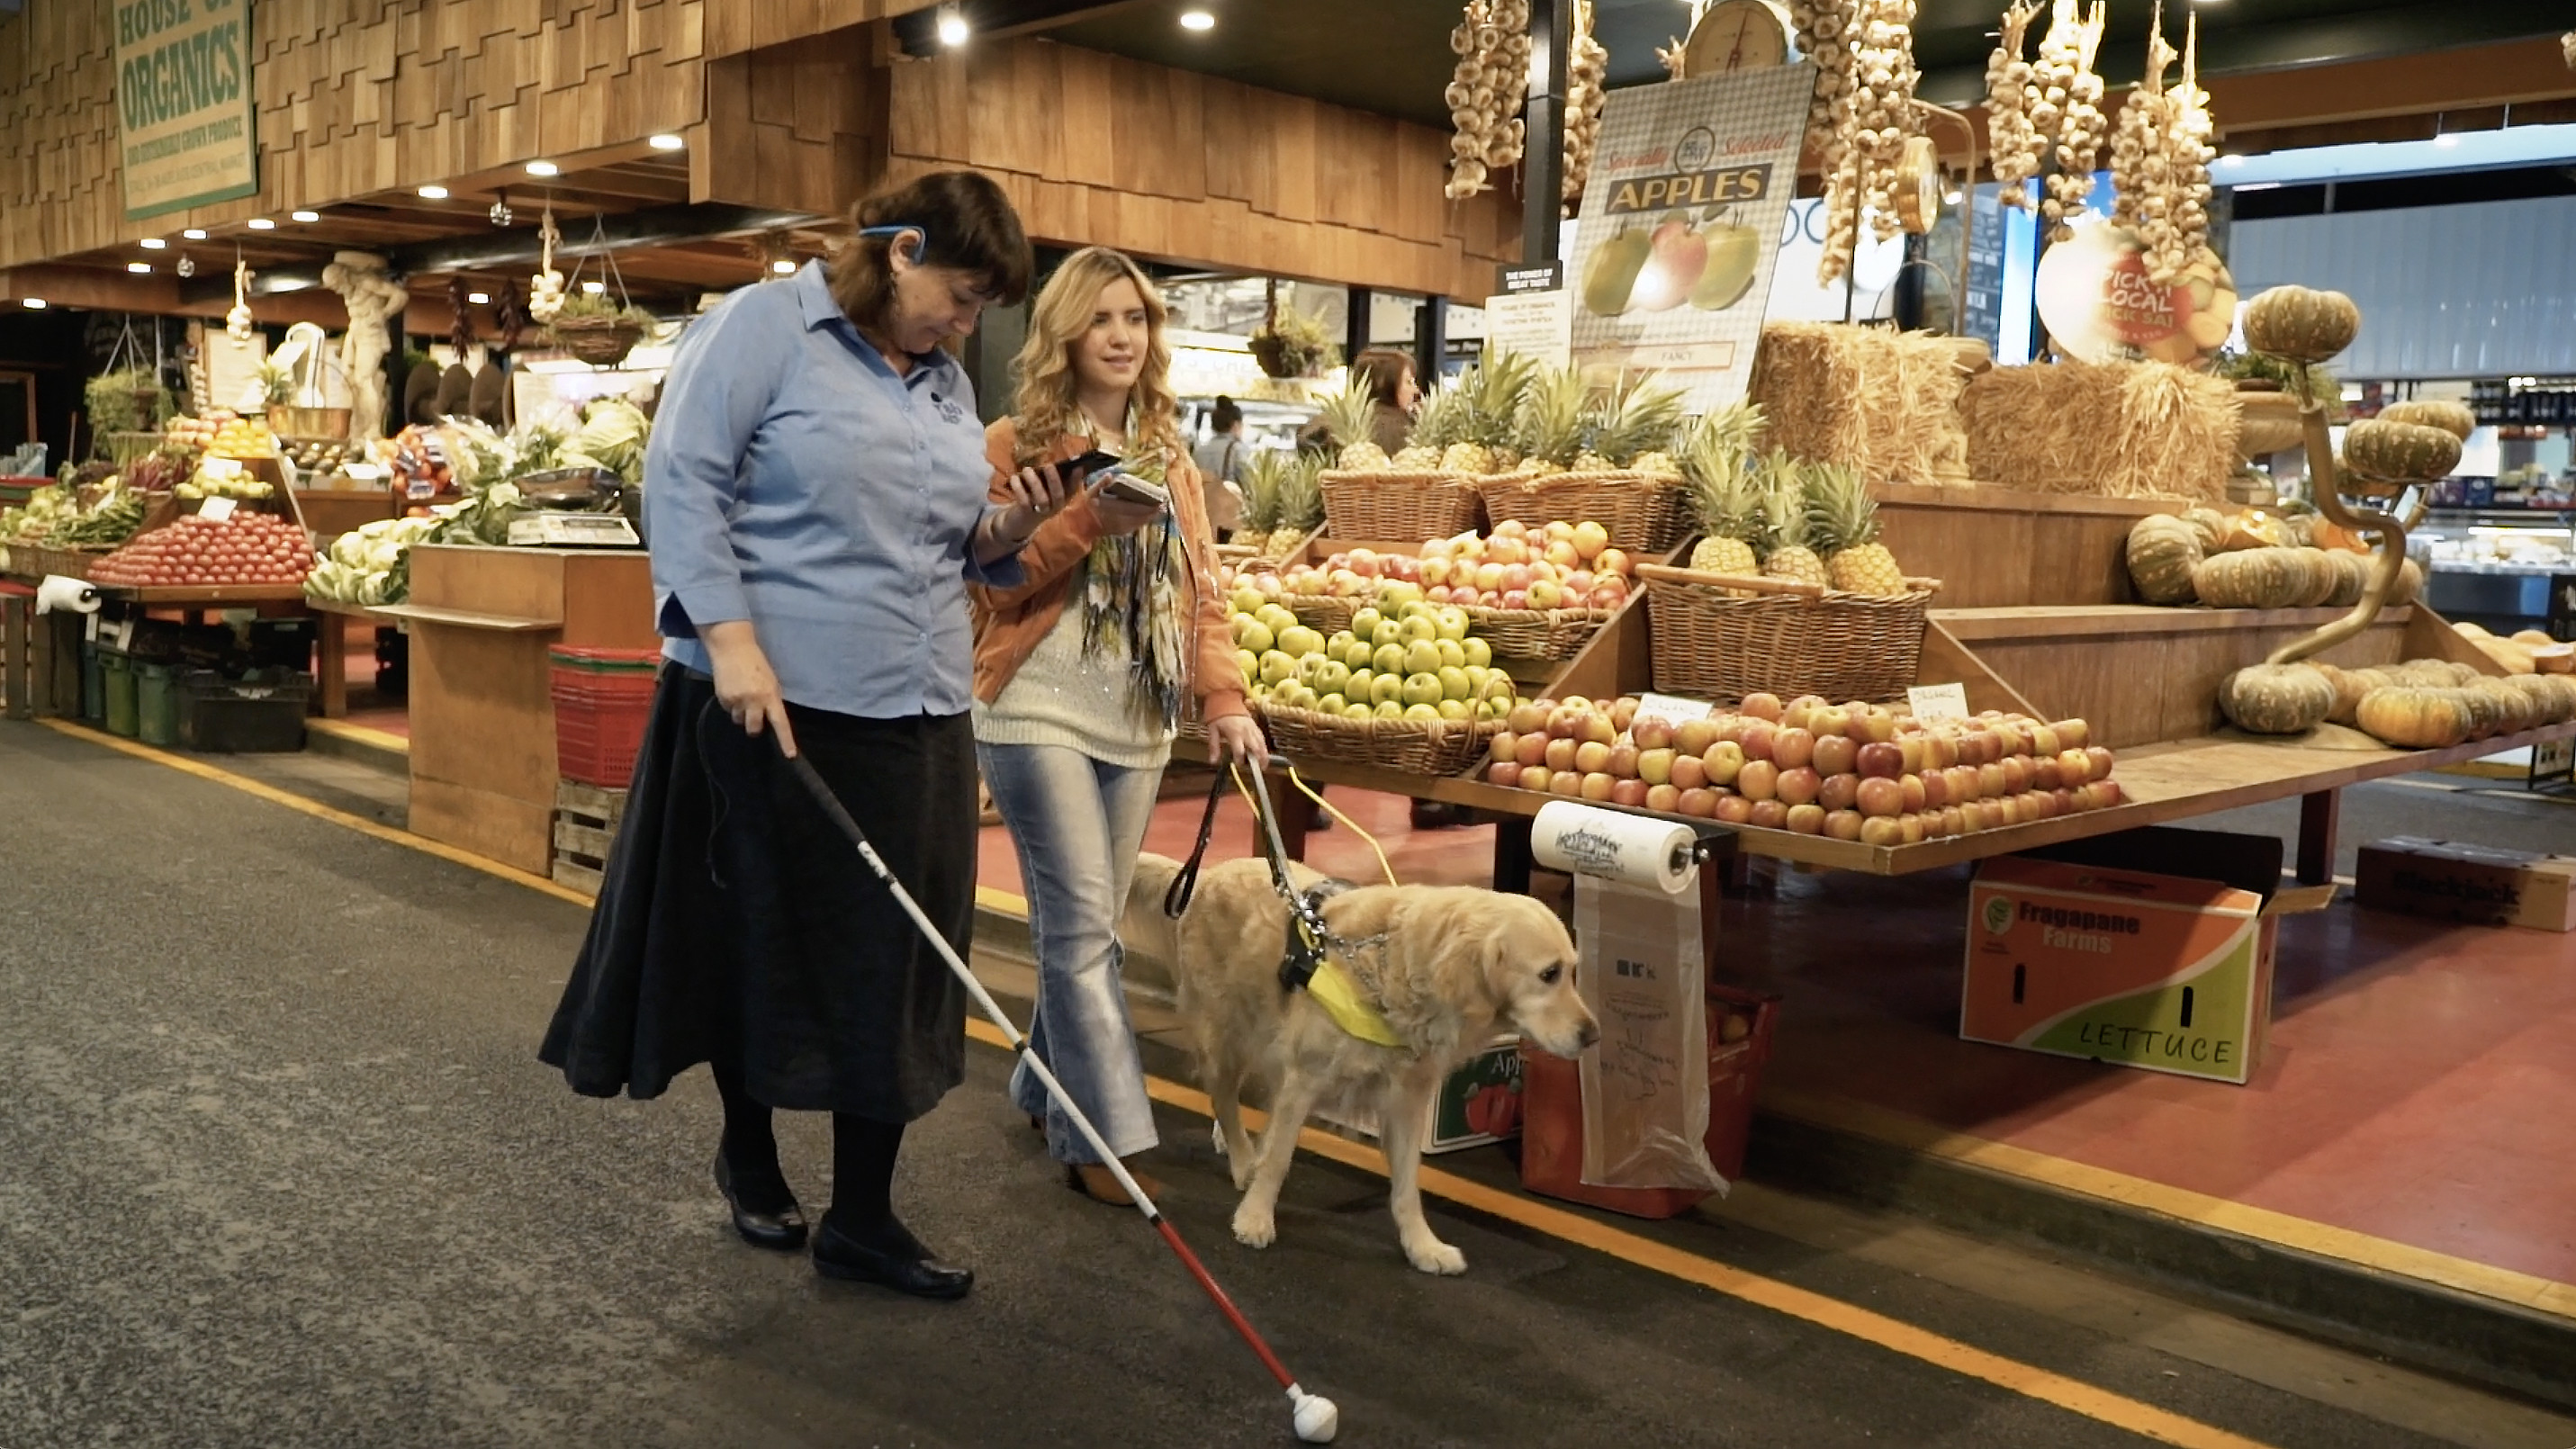 Two blind women walking amongst fresh fruit at a market. One woman is using a cane, wearing a light blue shirt, with dark hair and a black skirt. The other women is a little younger with curly, flowing blonde hair. She is walking with her guide dog and looking down at her phone using the BindiMaps app.